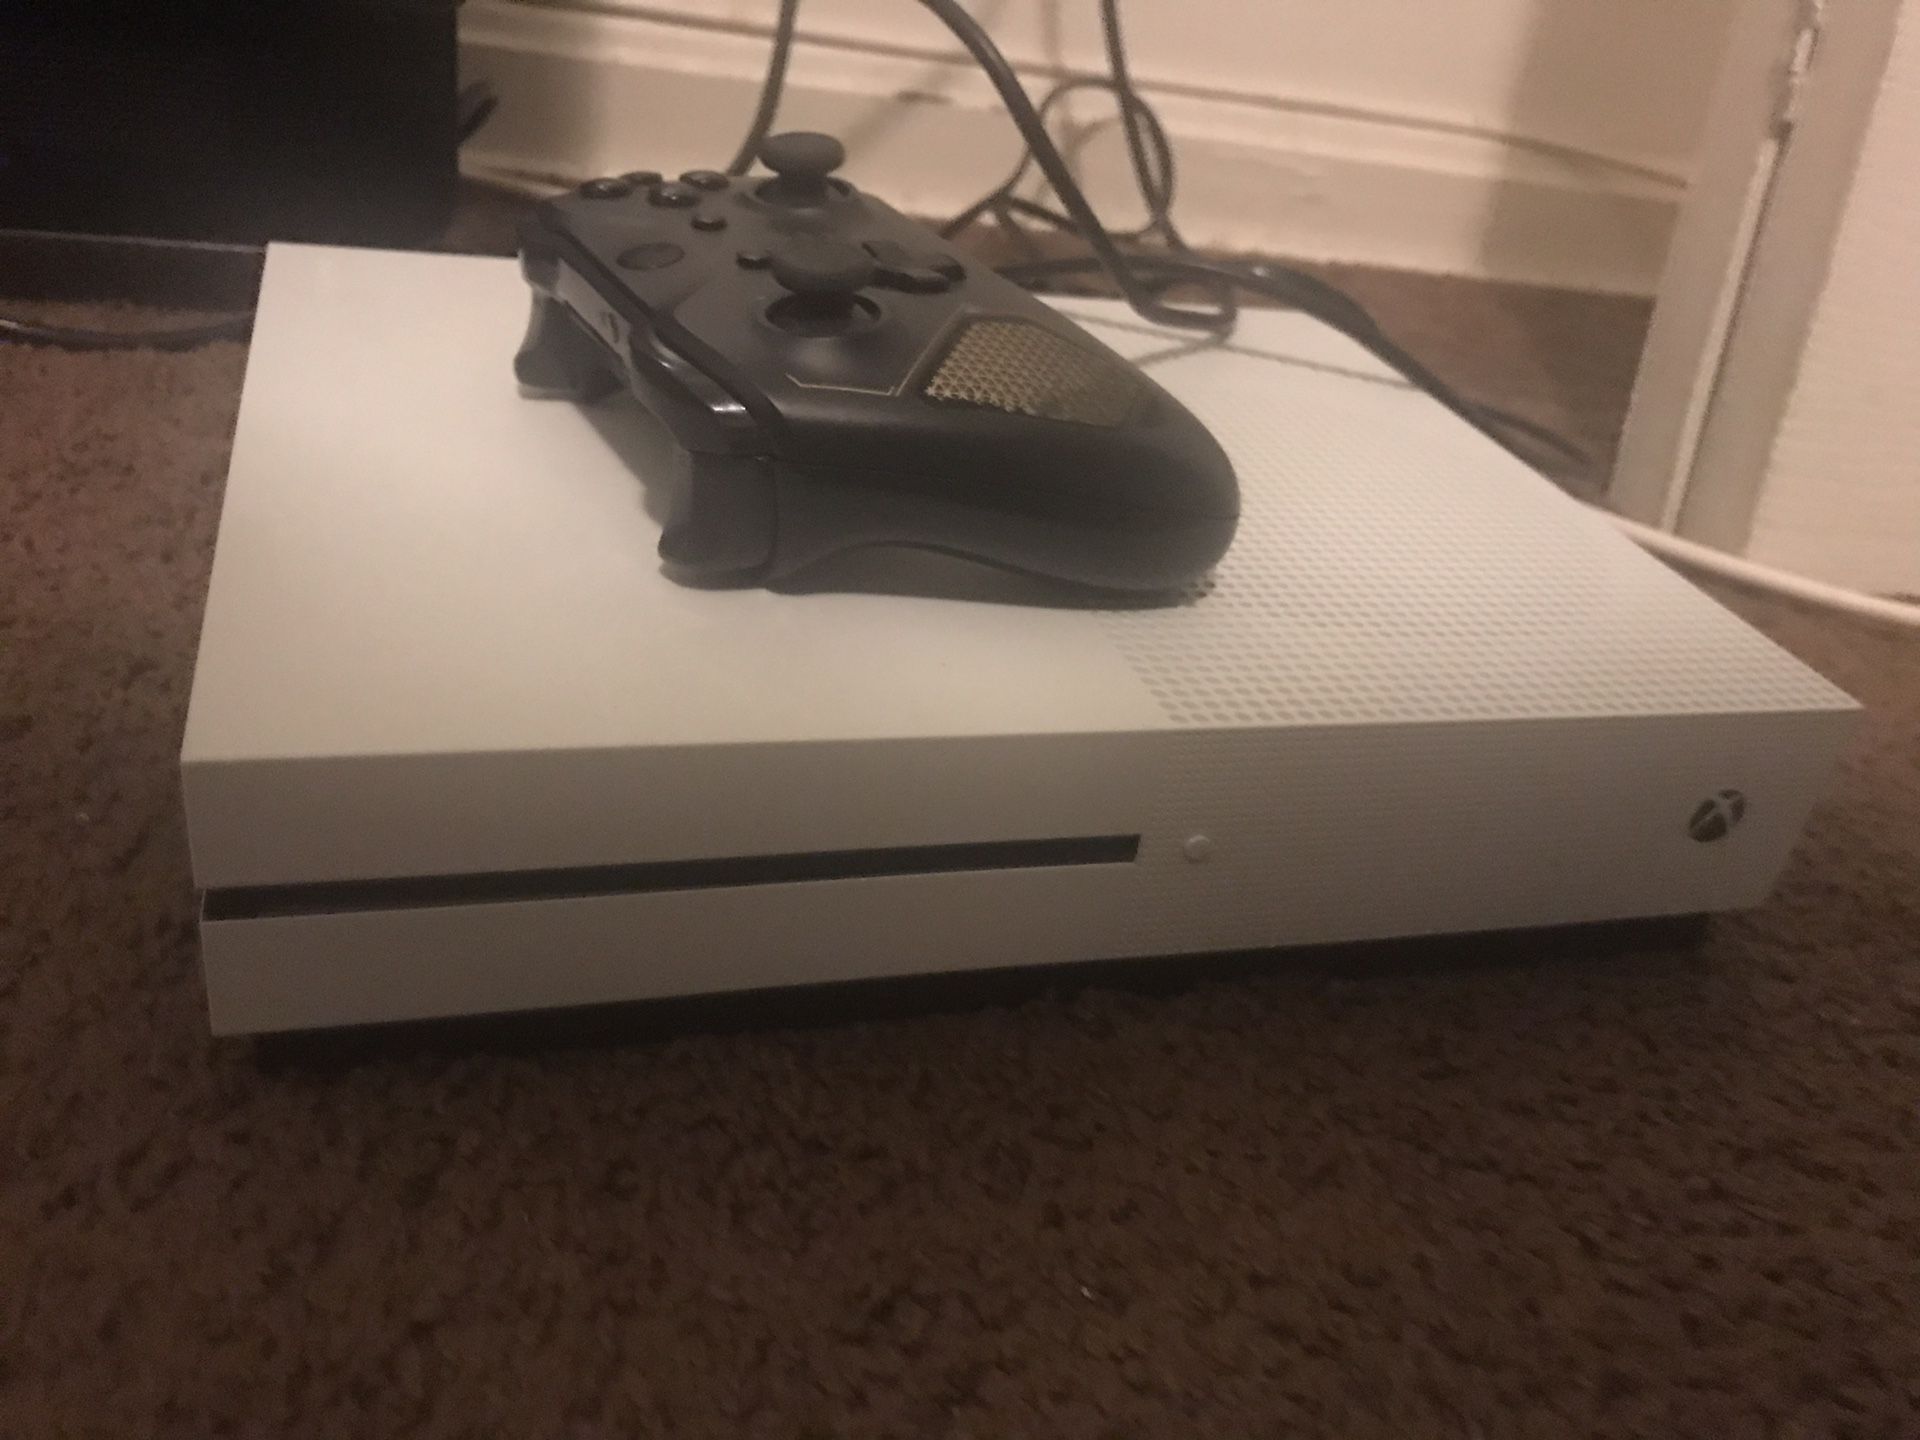 Xbox One S selling for 225